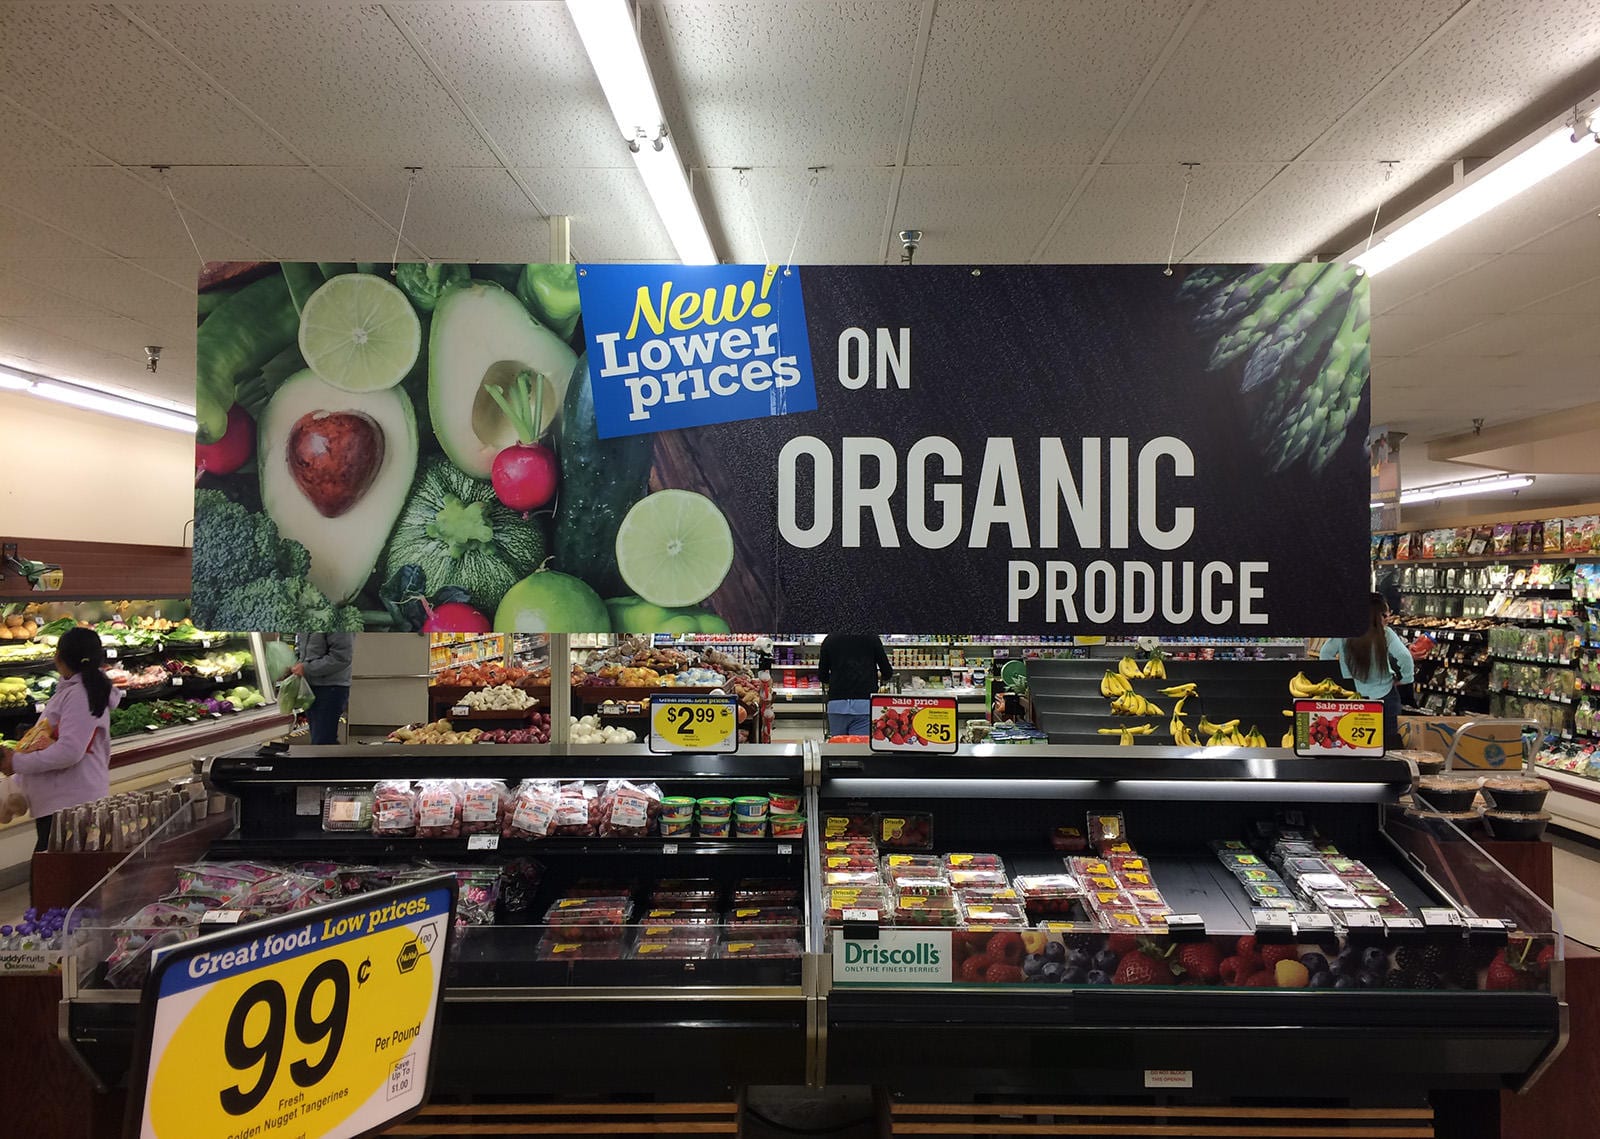 An image of a produce section in a grocery store.